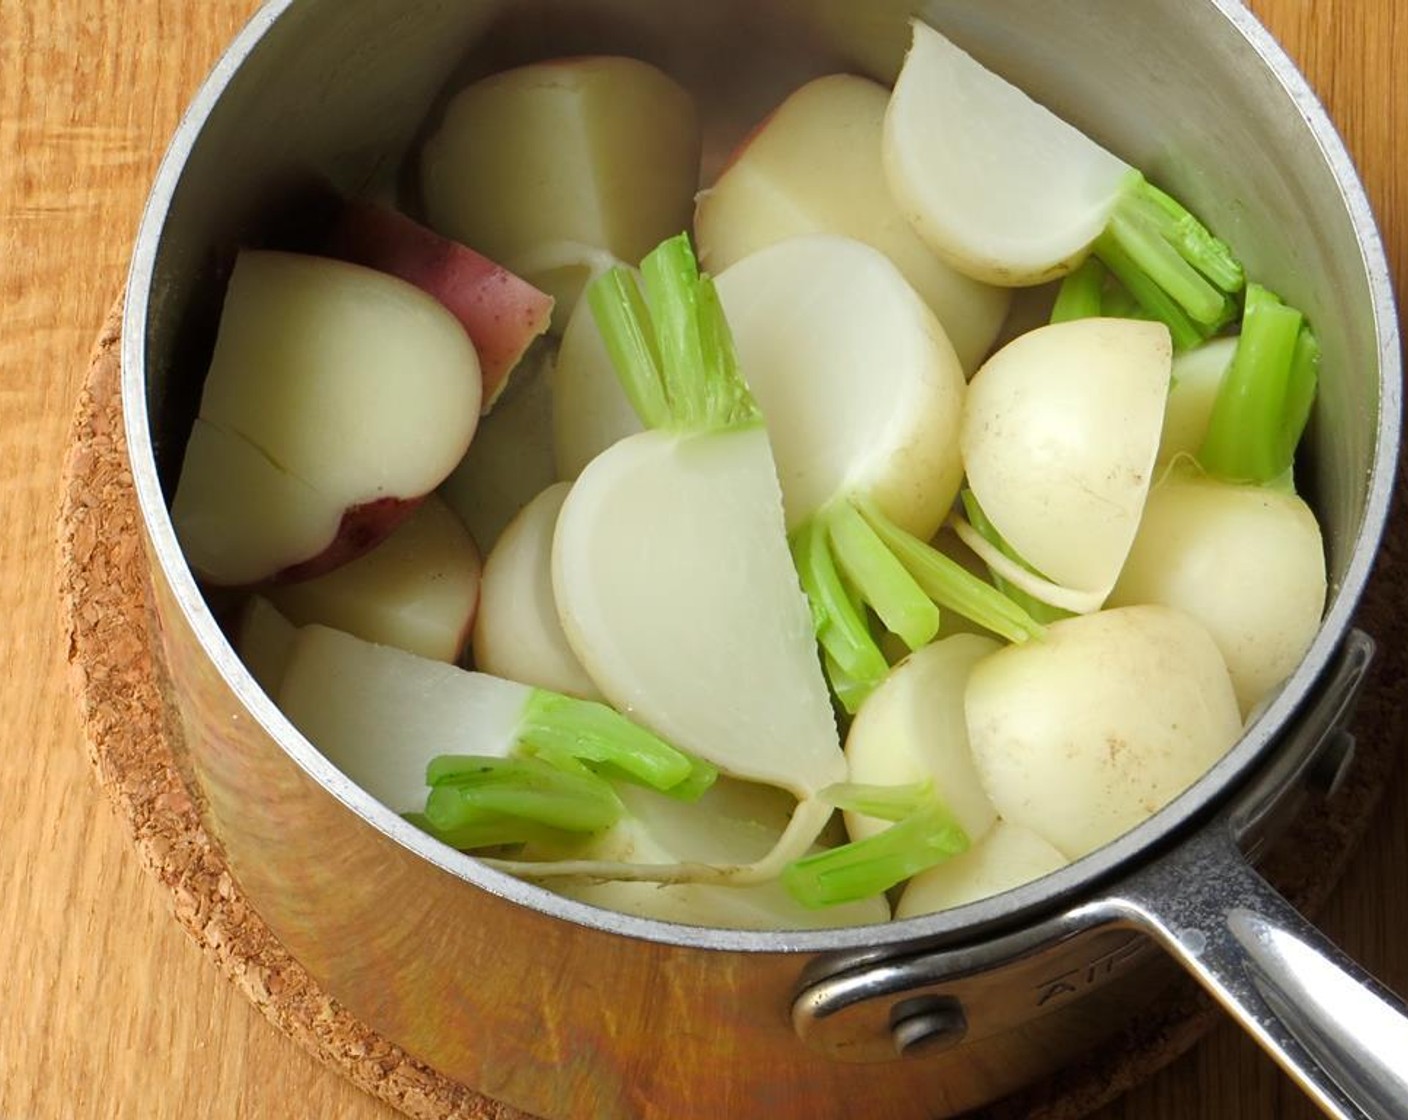 step 5 Fill a medium pot with water and Kosher Salt (1 tsp) and bring to a boil. Add potatoes and turnips, reduce heat to a rapid simmer and cook vegetables until tender, about 15 minutes. Drain.